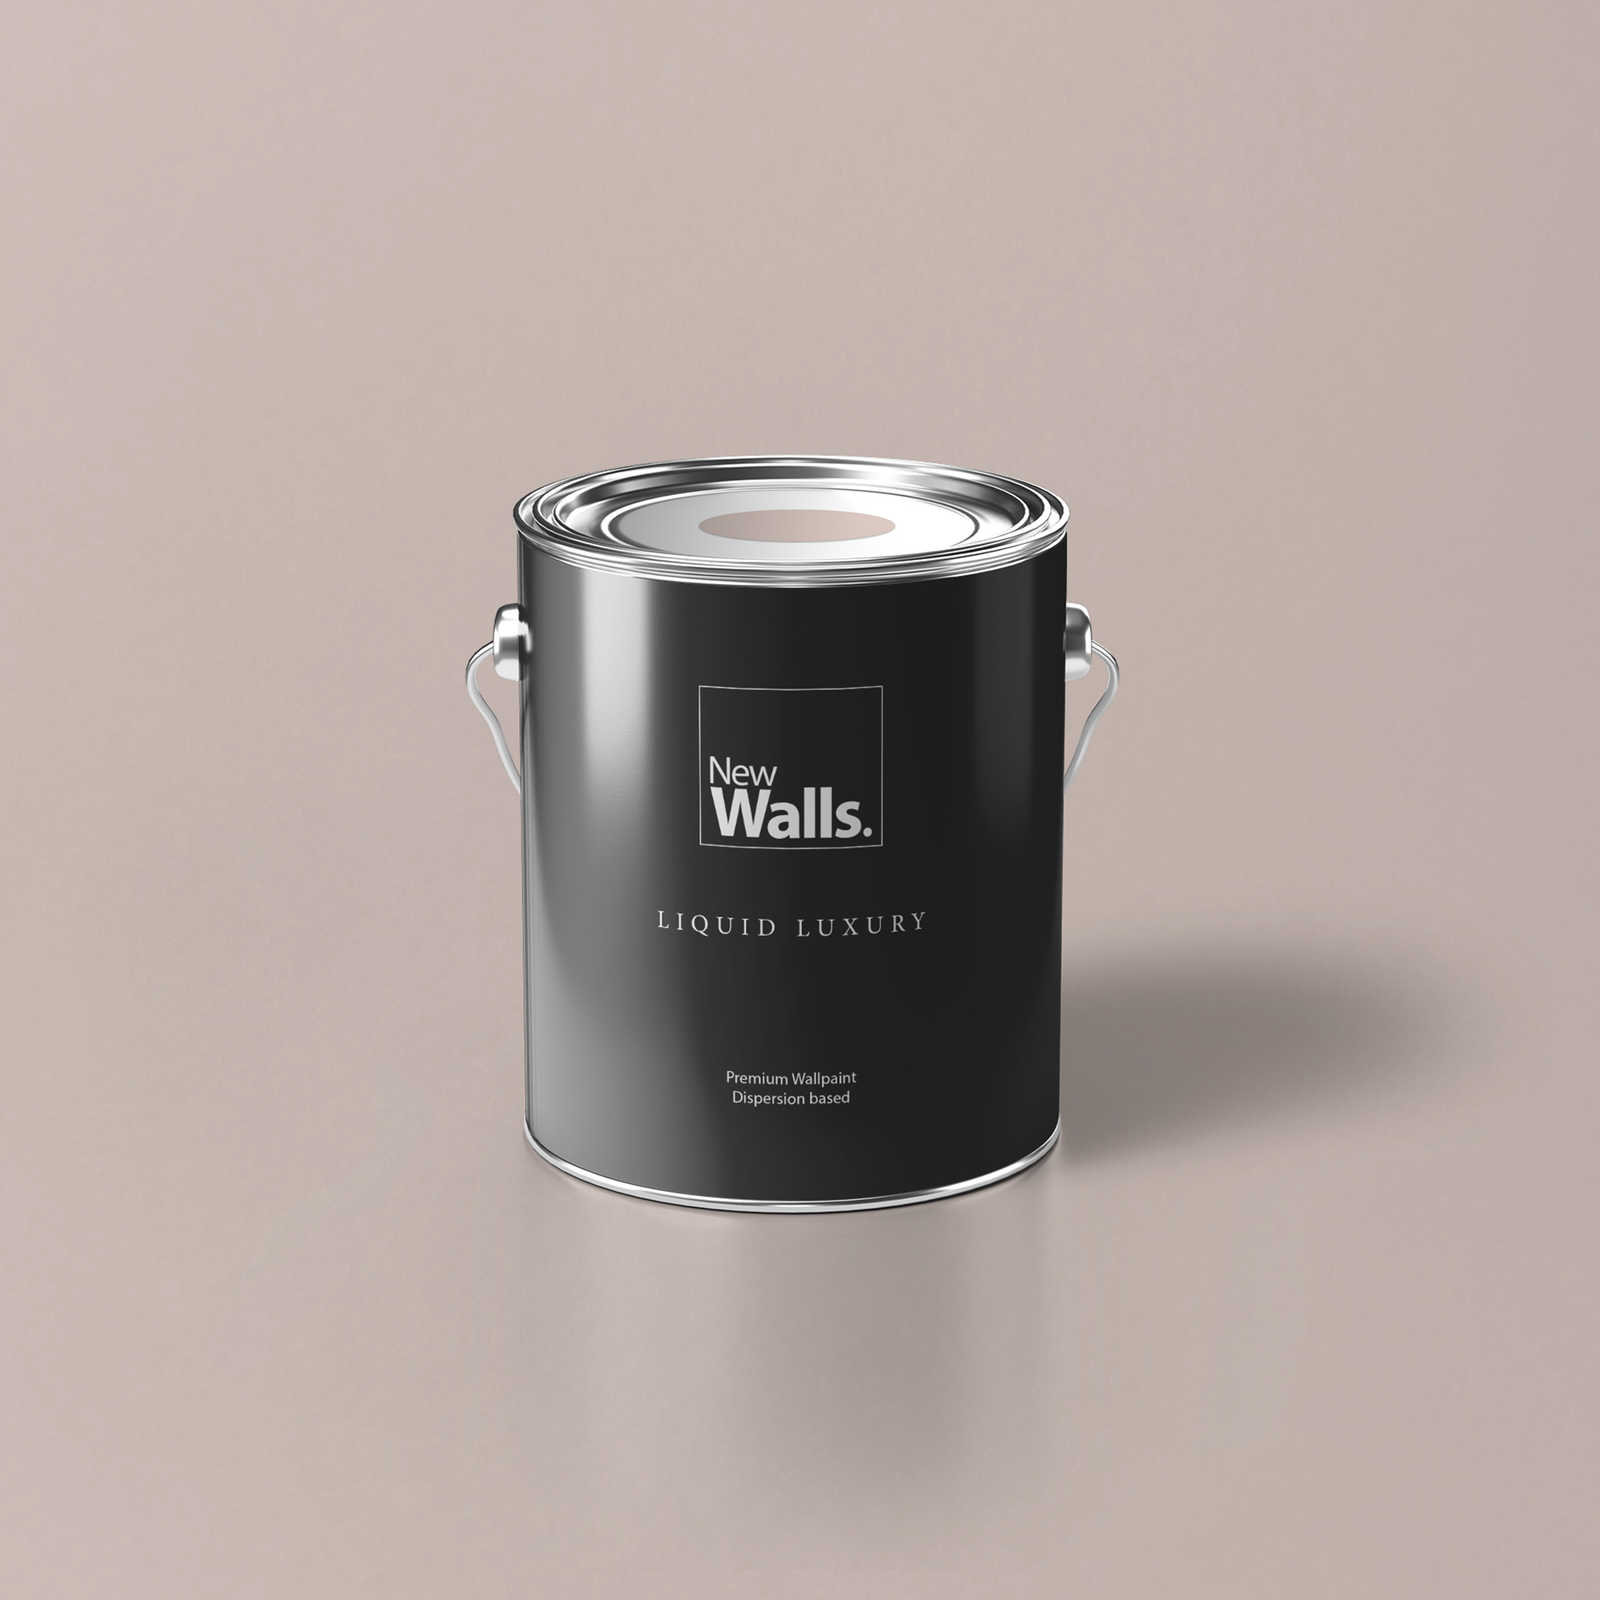 Premium Wall Paint Soothing Old Pink »Natural Nude« NW1008 – 2.5 litre
